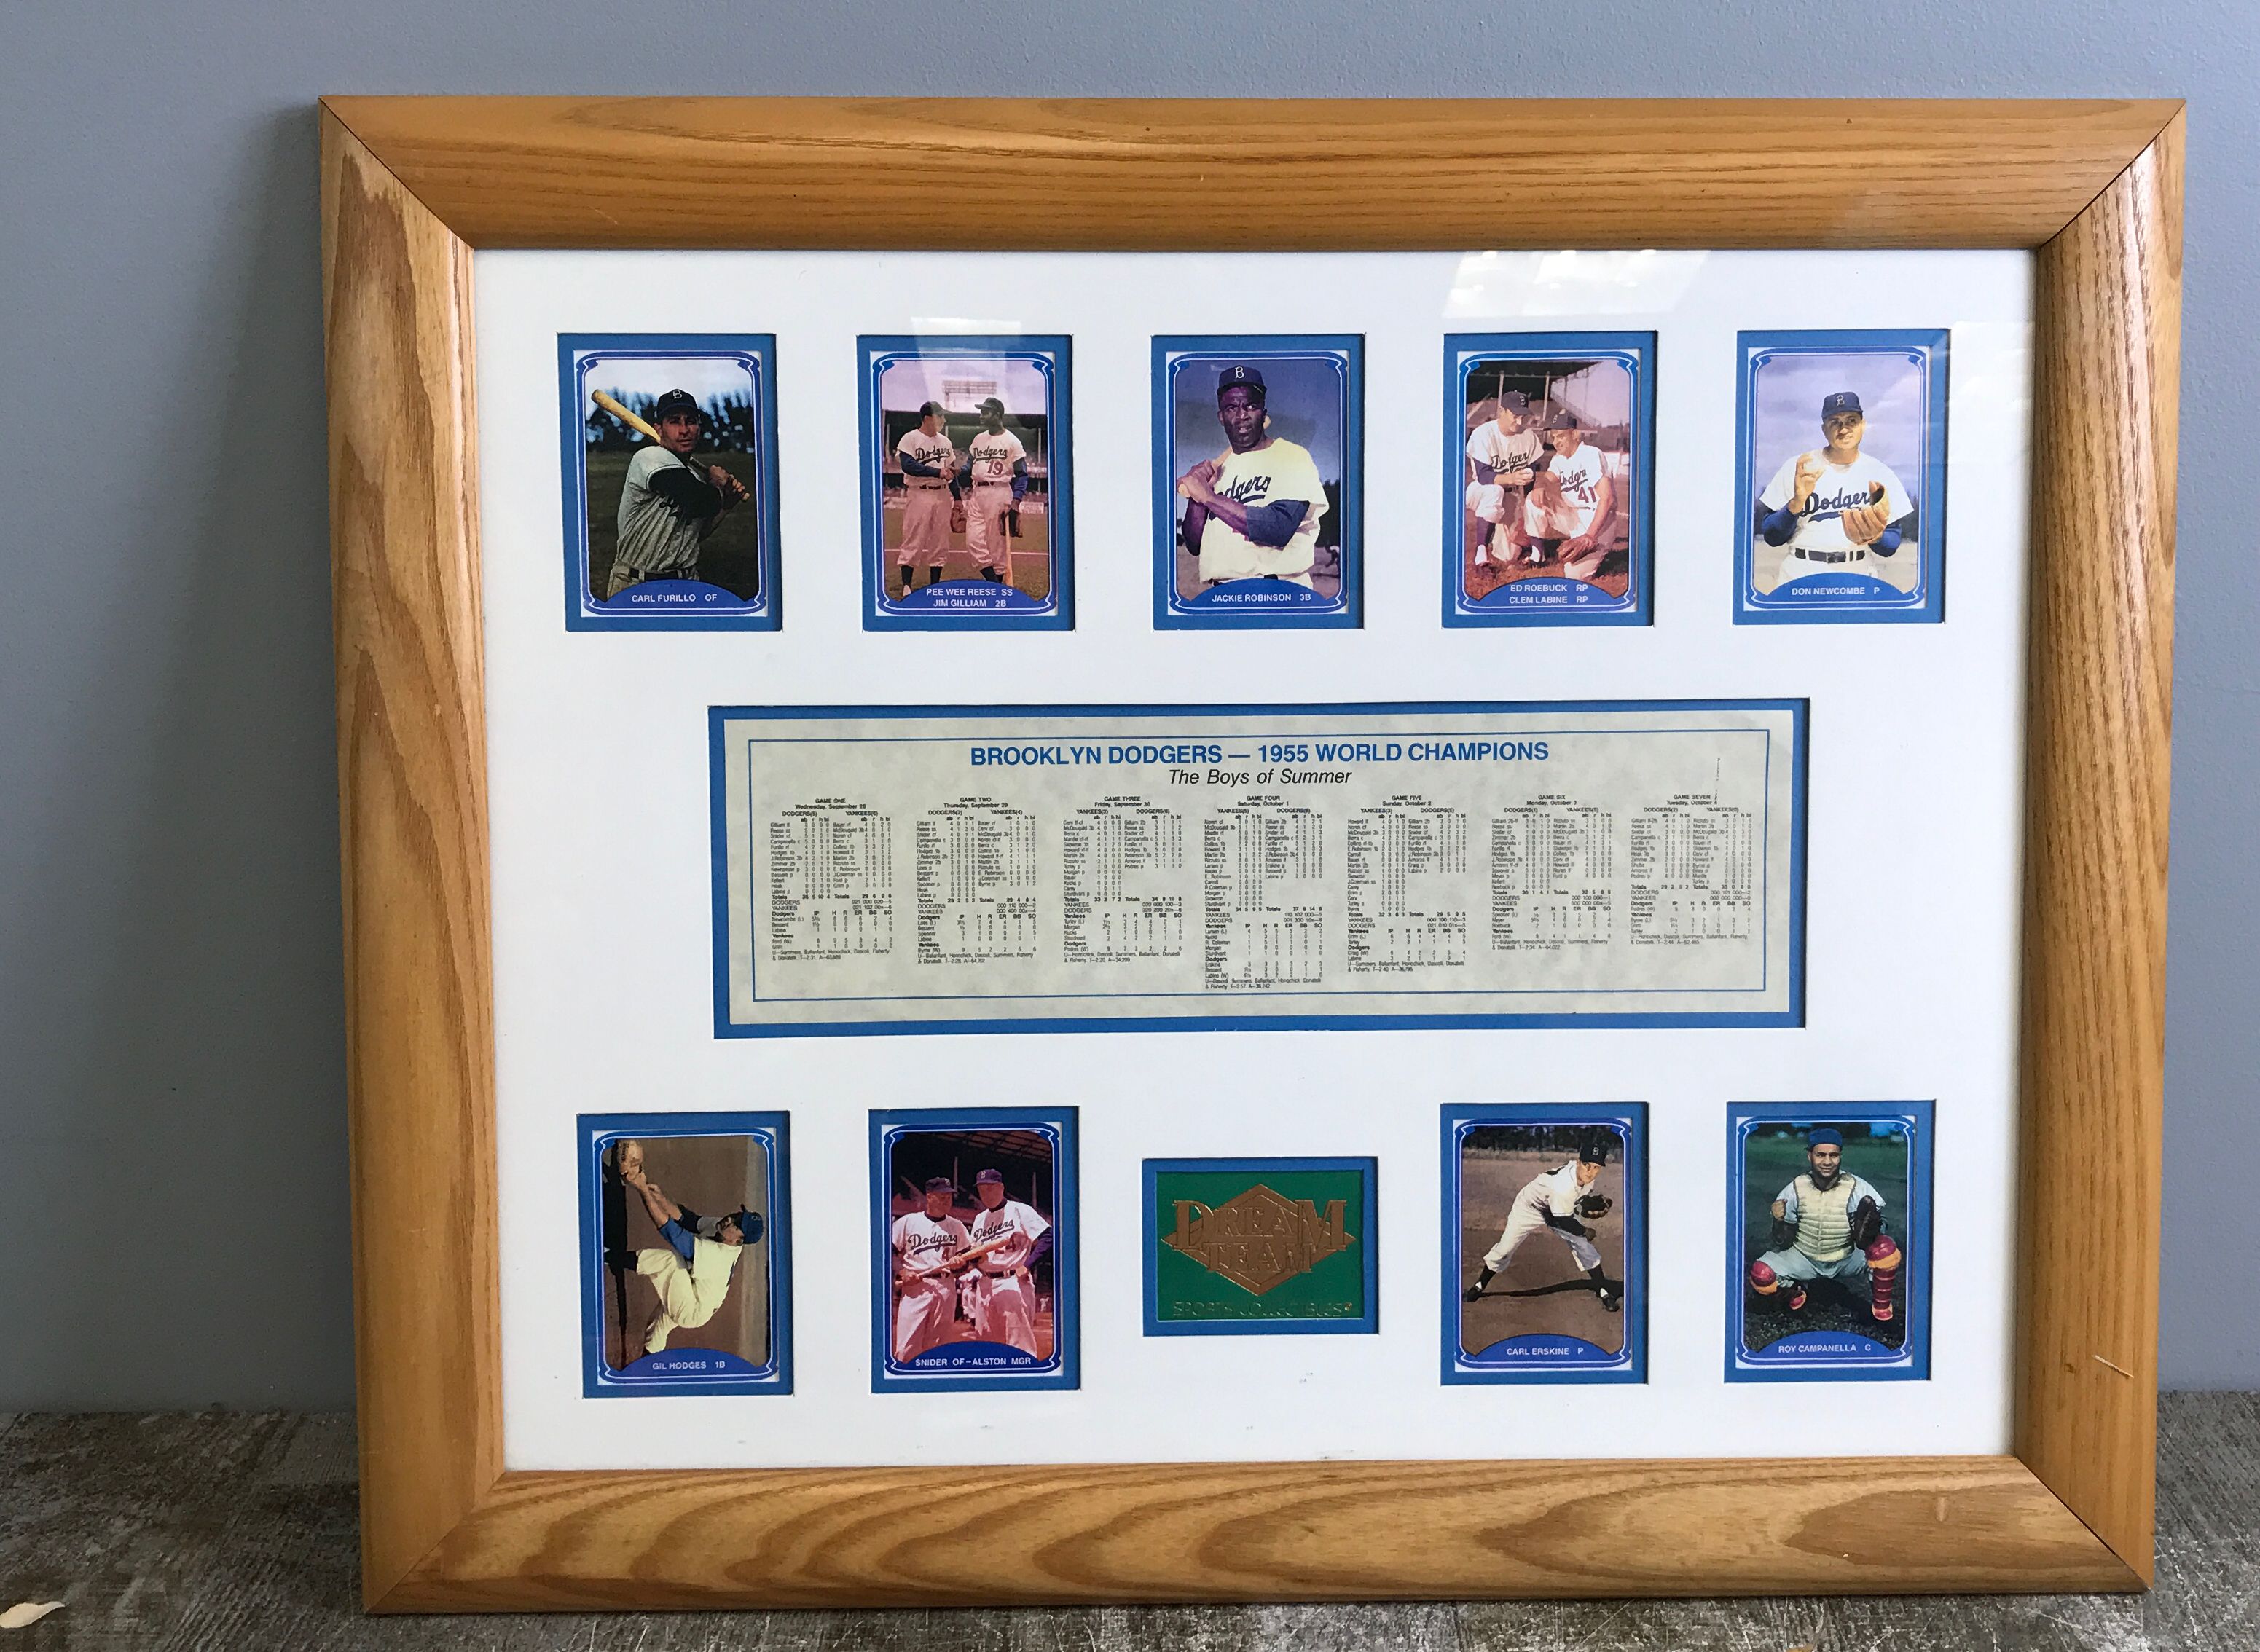 Brooklyn Dodgers 1955 World Champions "The Boys of Summer" Framed Collectible